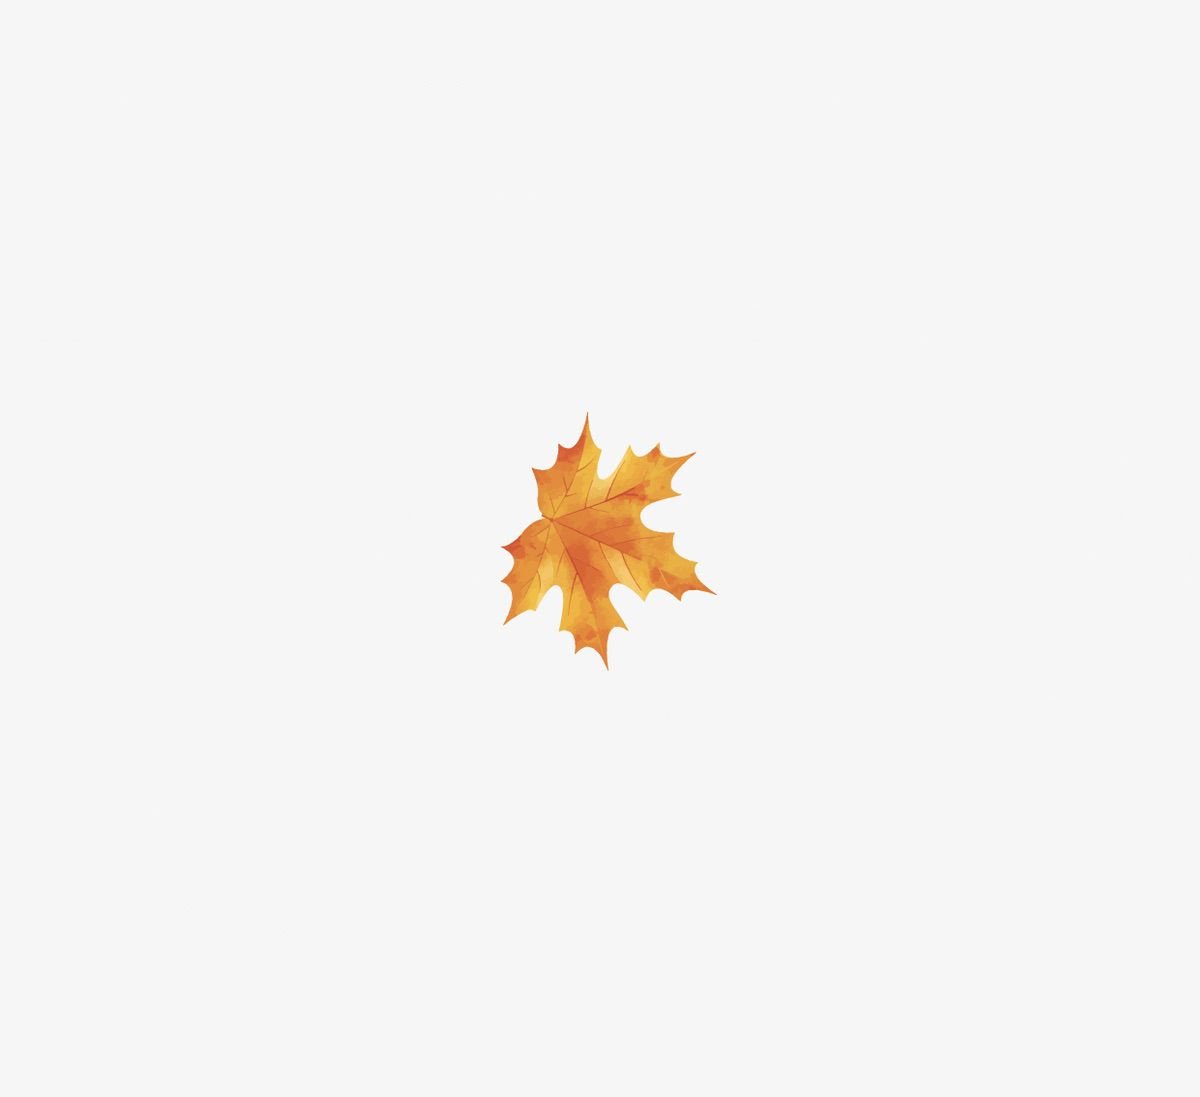 A single orange-yellow maple leaf with pointed edges, perfect for Thanksgiving decorations, on a plain white background featuring Cover-Alls Thanksgiving Cornucopia Decals.